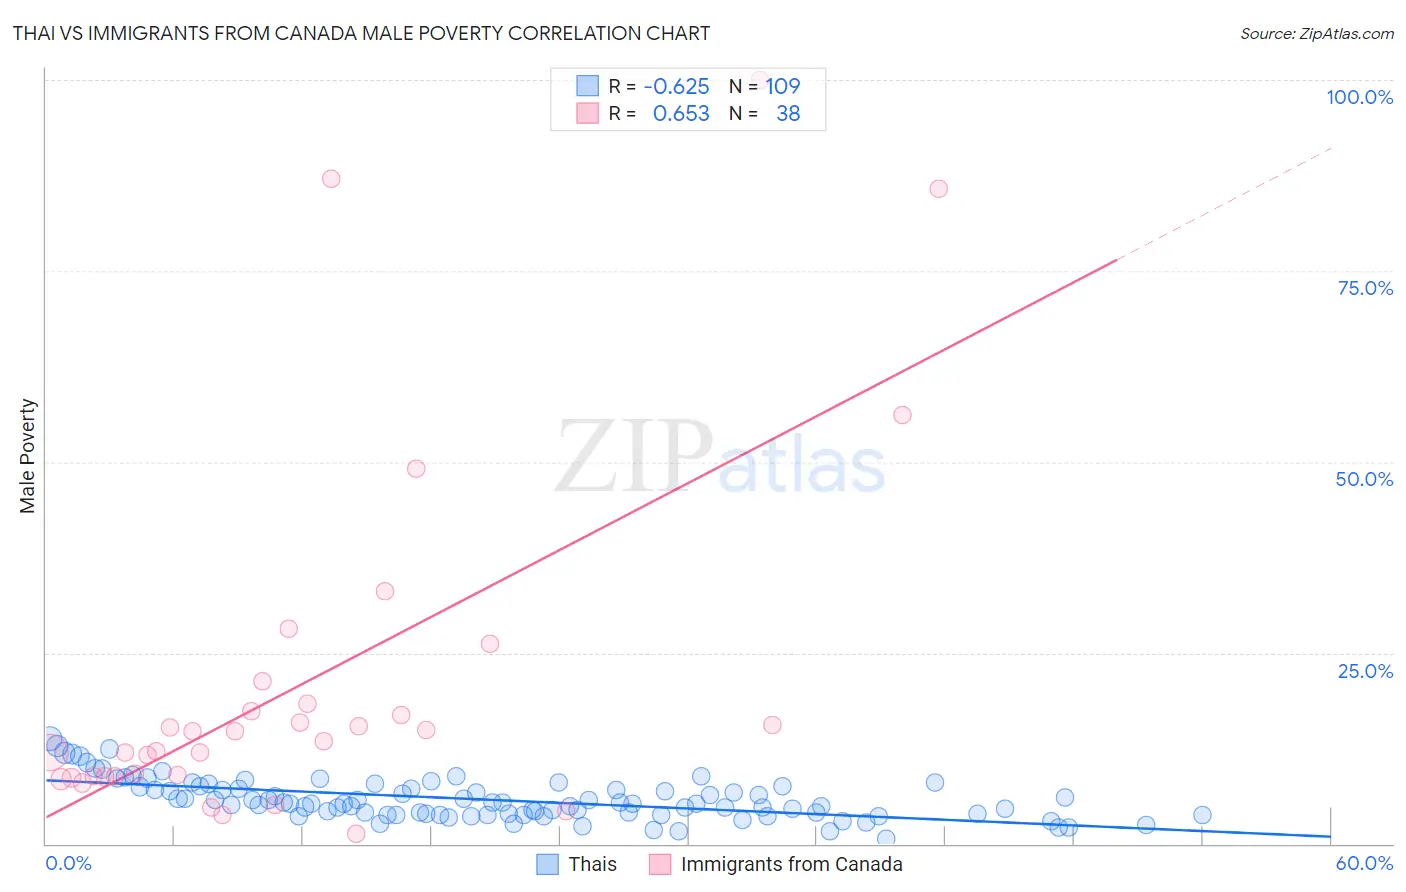 Thai vs Immigrants from Canada Male Poverty